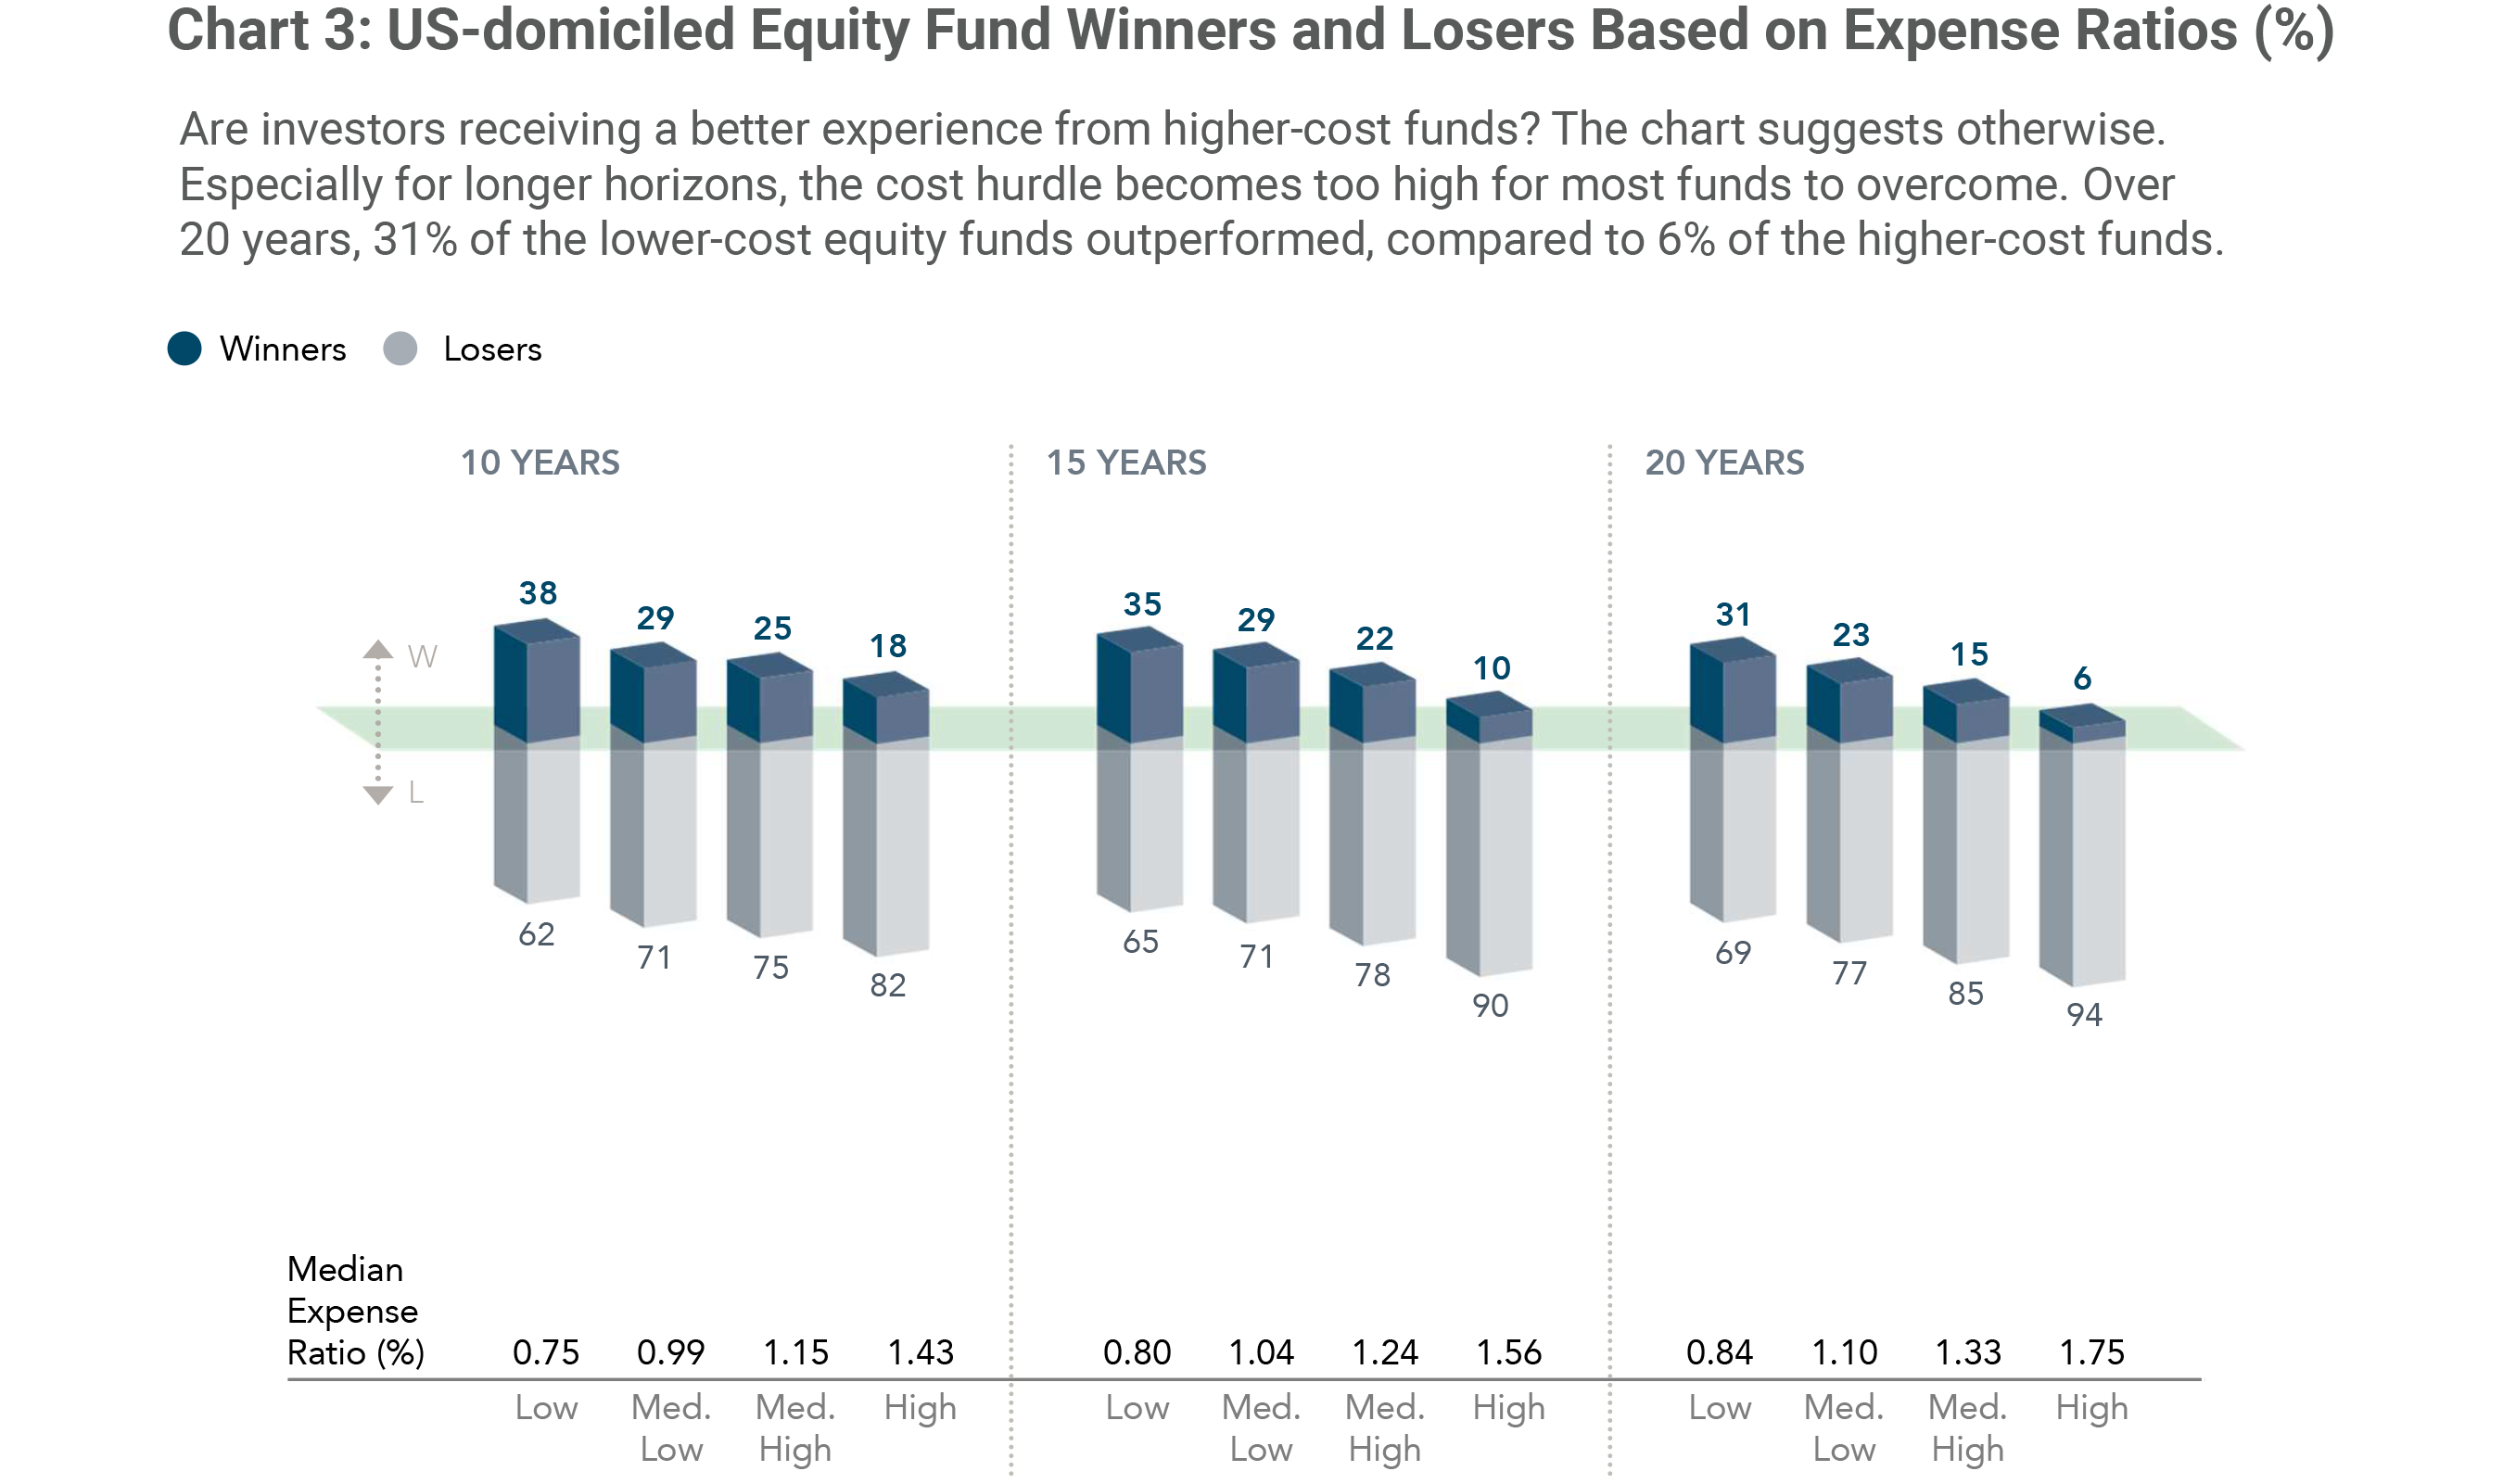 Chart 3: US-domiciled Equity Fund Winners and Losers Based on Expense Ratios (%)